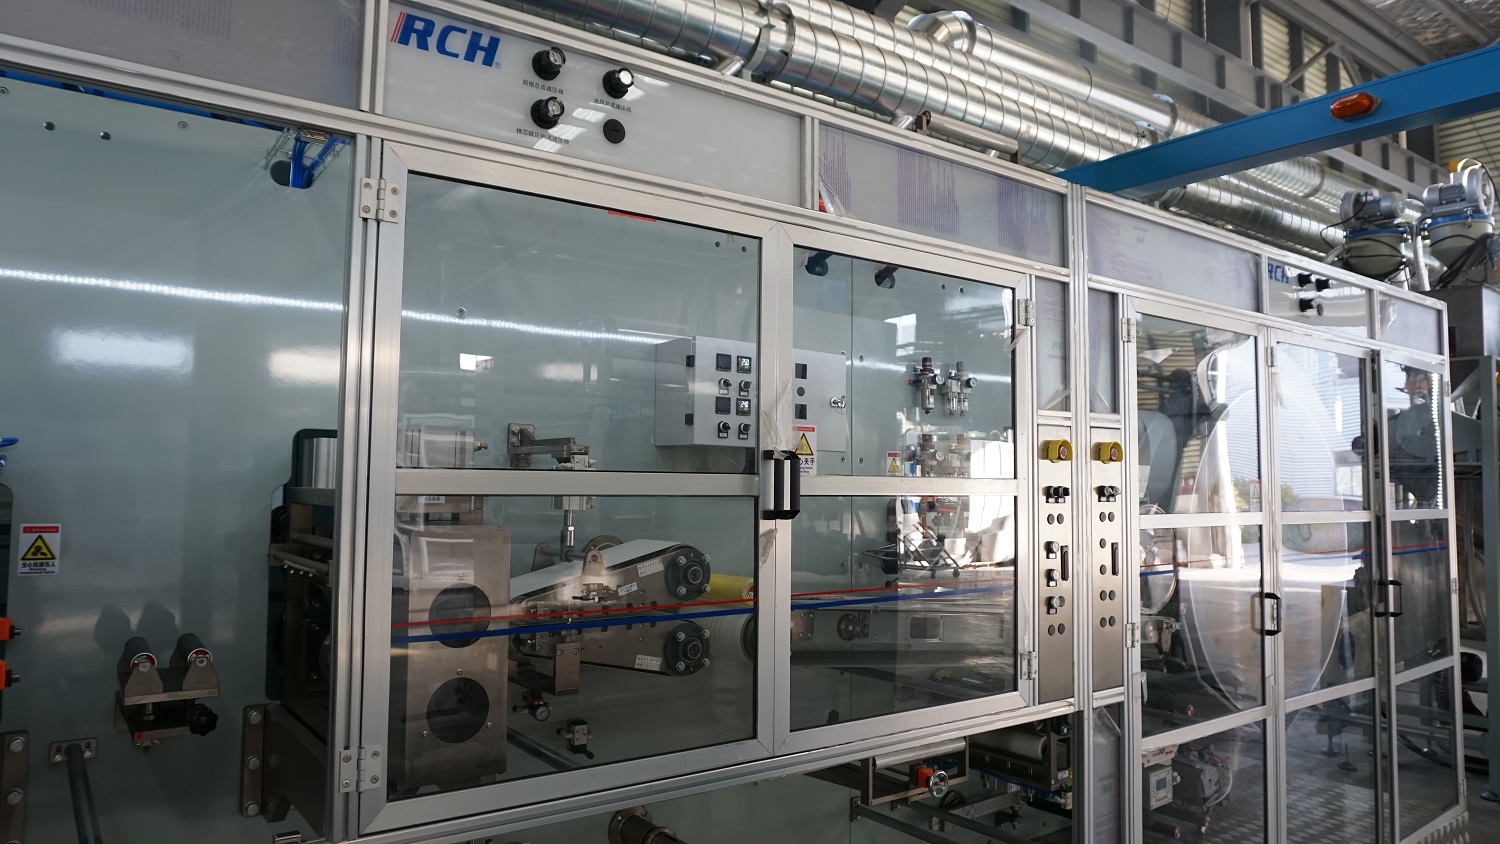 RCH Baby Pull-up Pants Converting Machine Maker